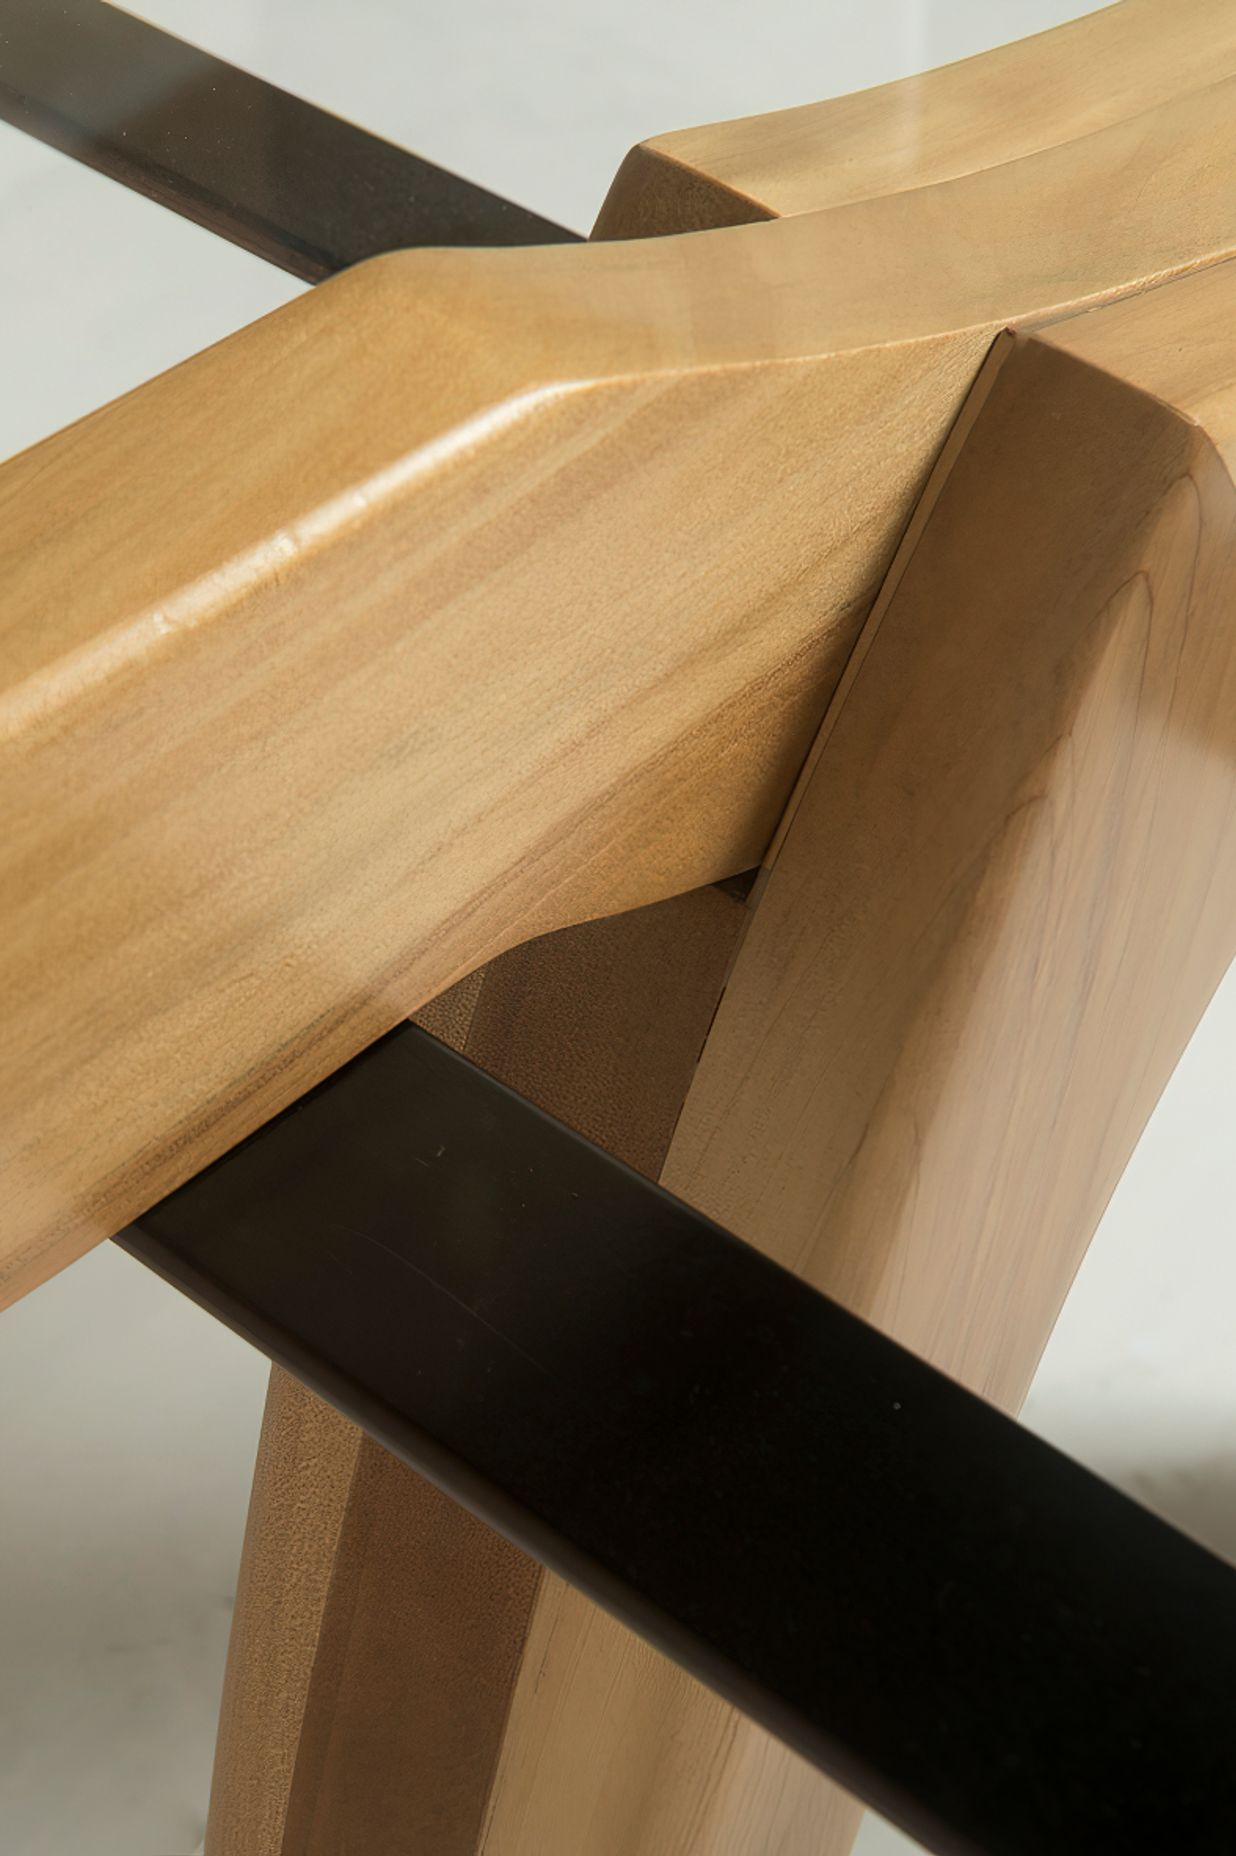 “The curves and shapes of this piece can only really be achieved by a draw blade and spokeshave, rather than a CNC.”